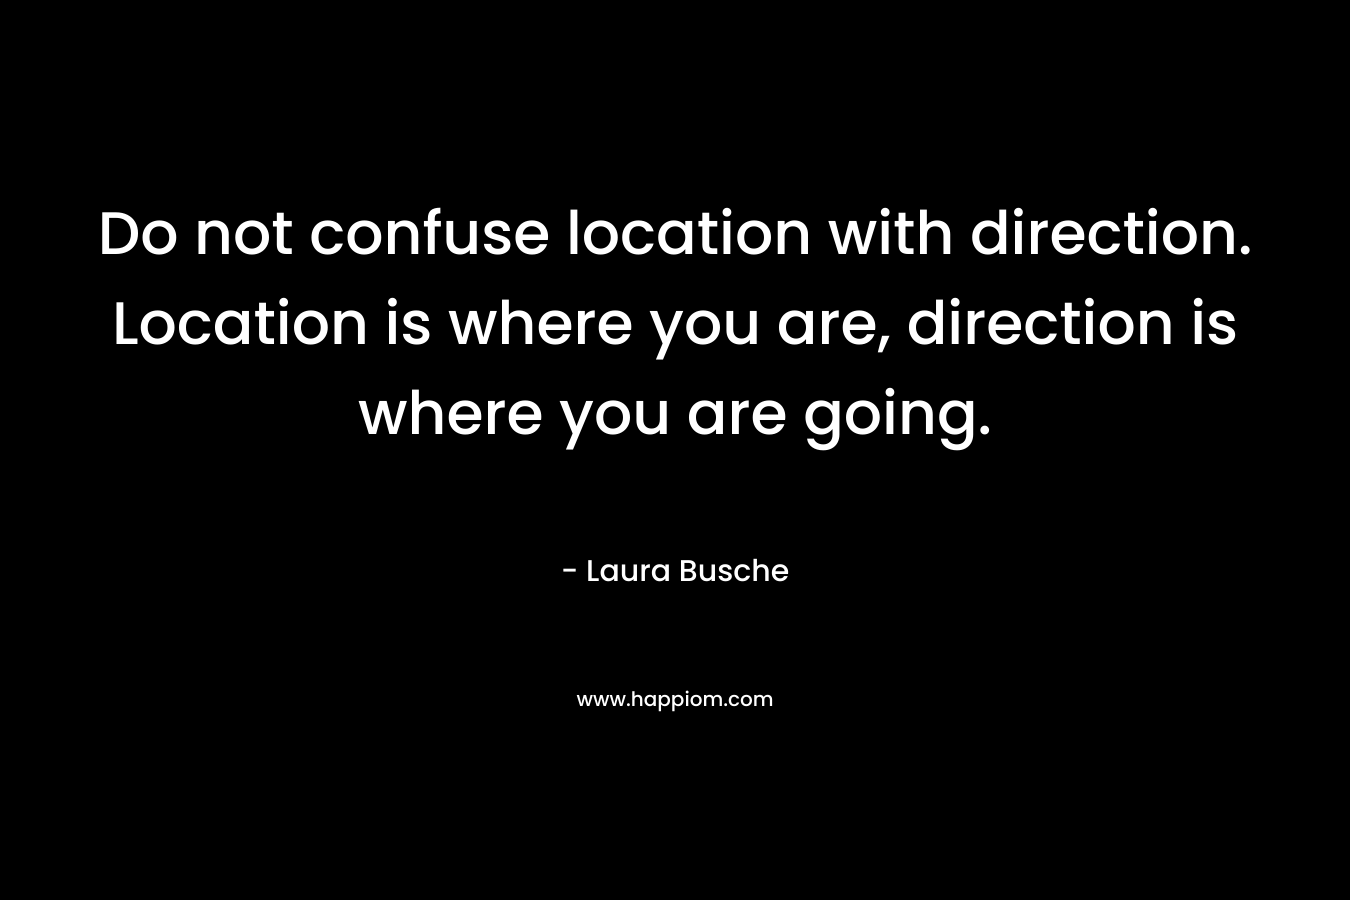 Do not confuse location with direction. Location is where you are, direction is where you are going.